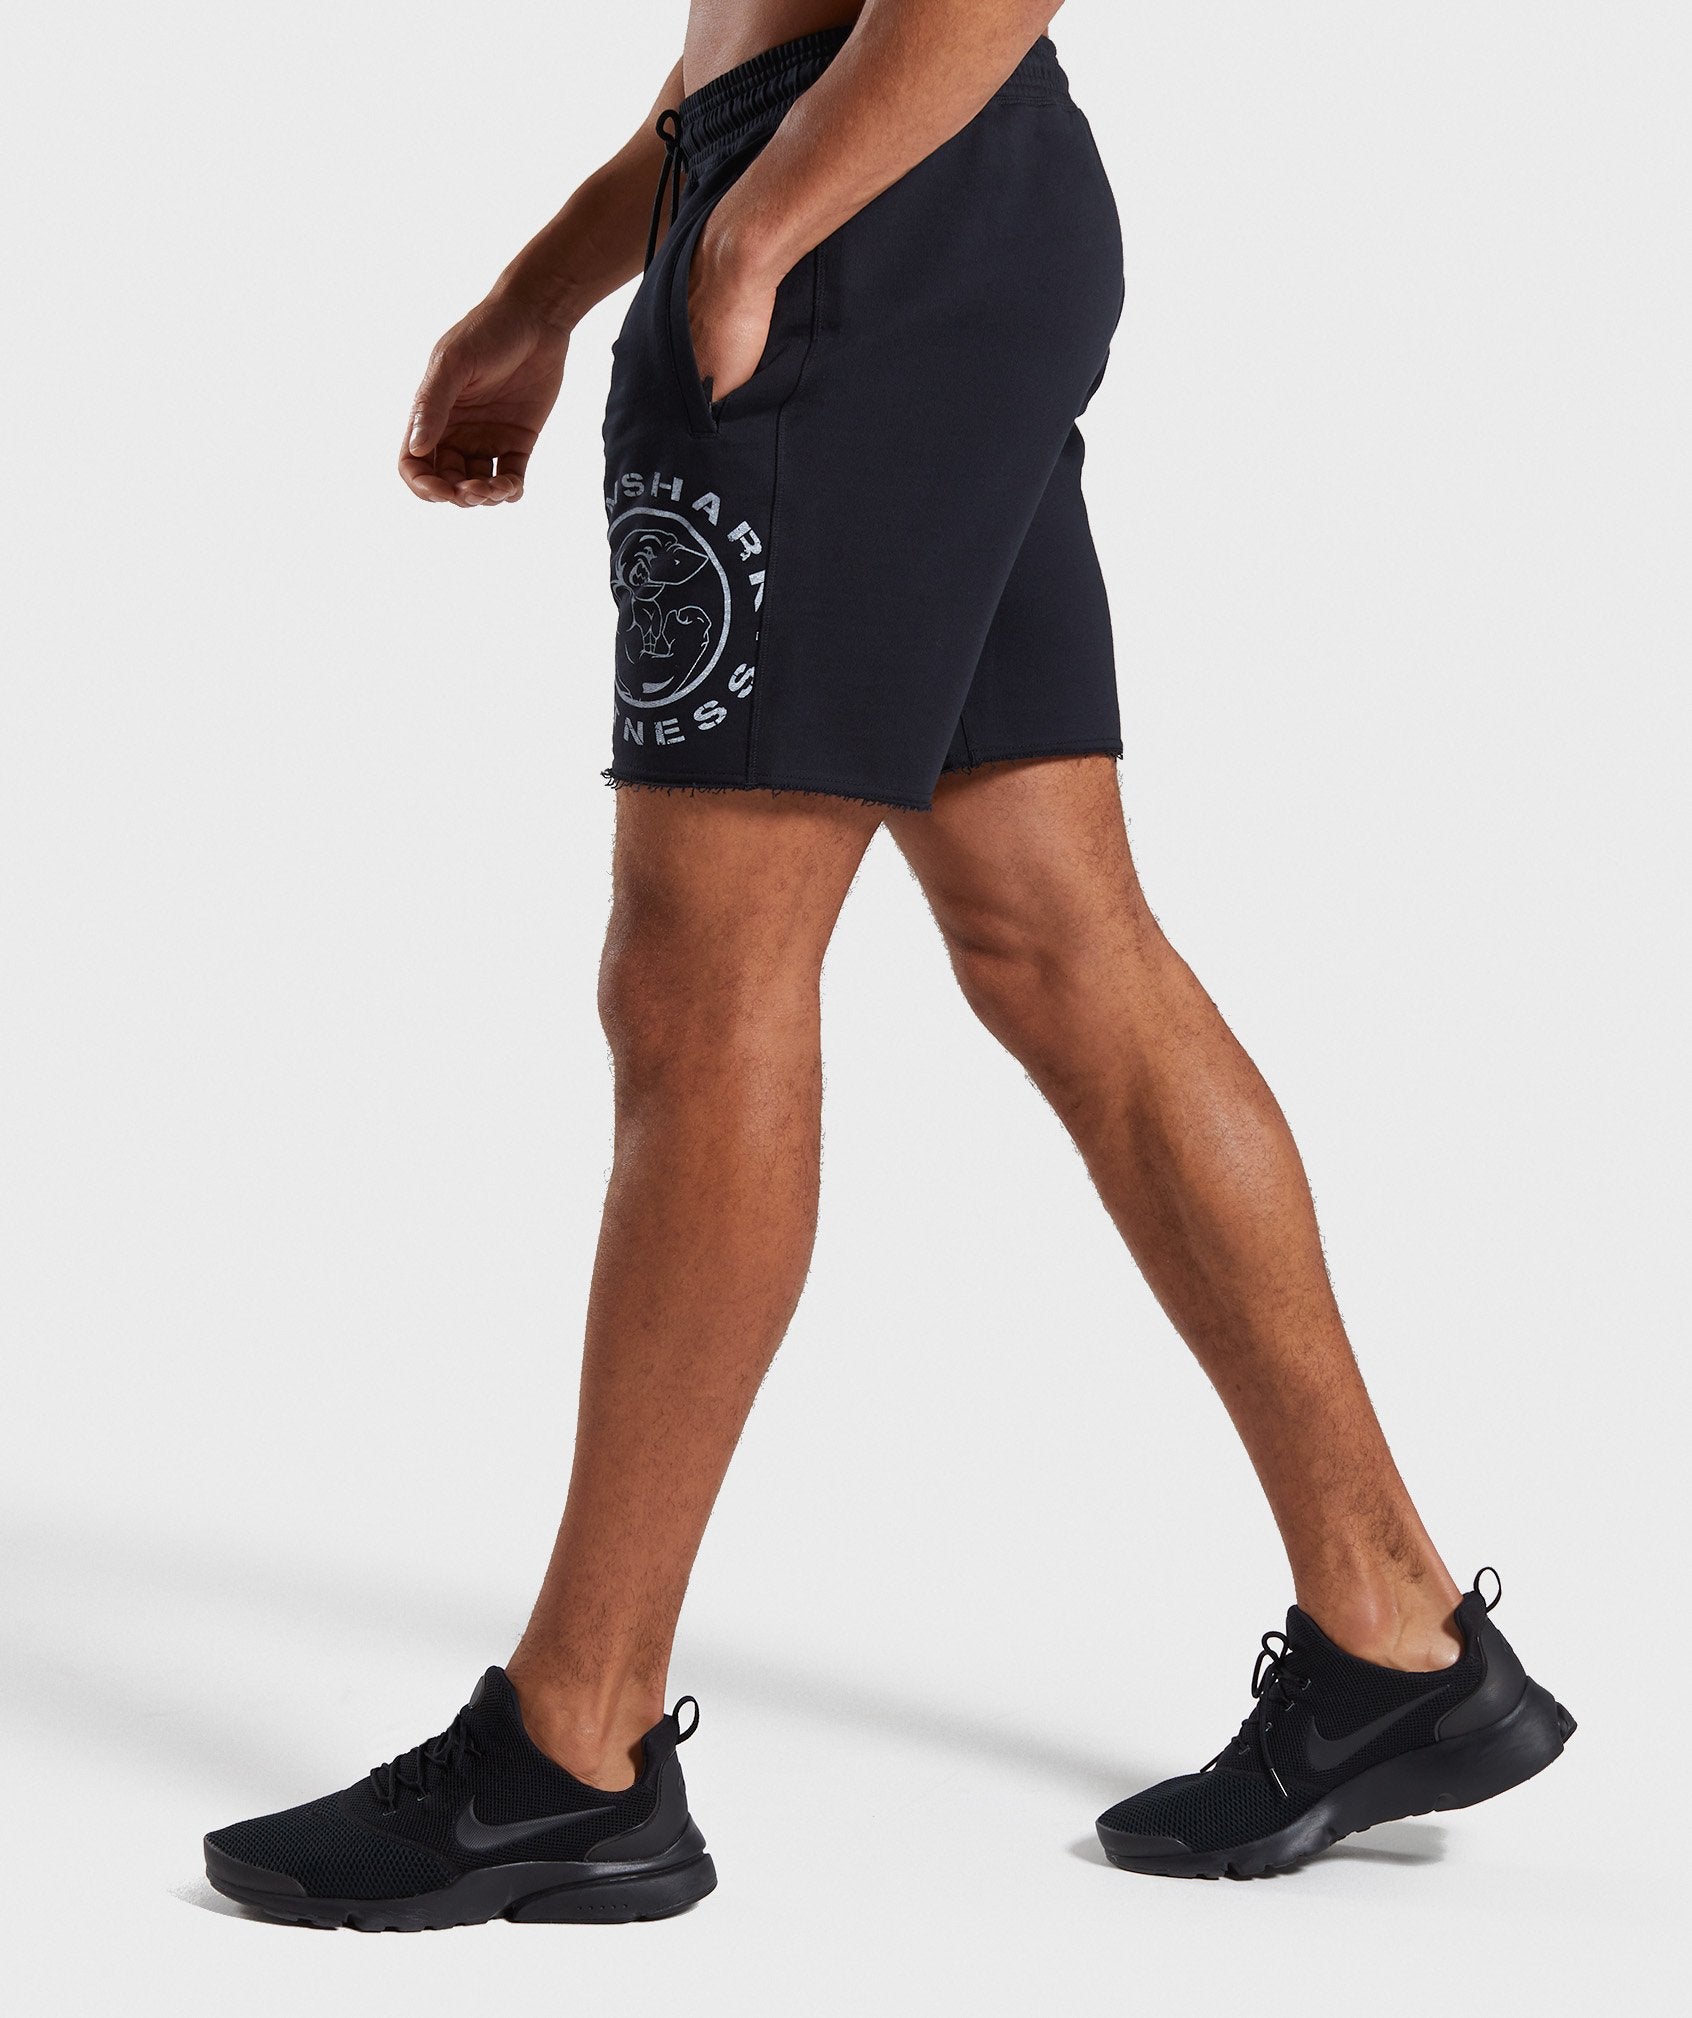 Legacy Plus Shorts in Black - view 3